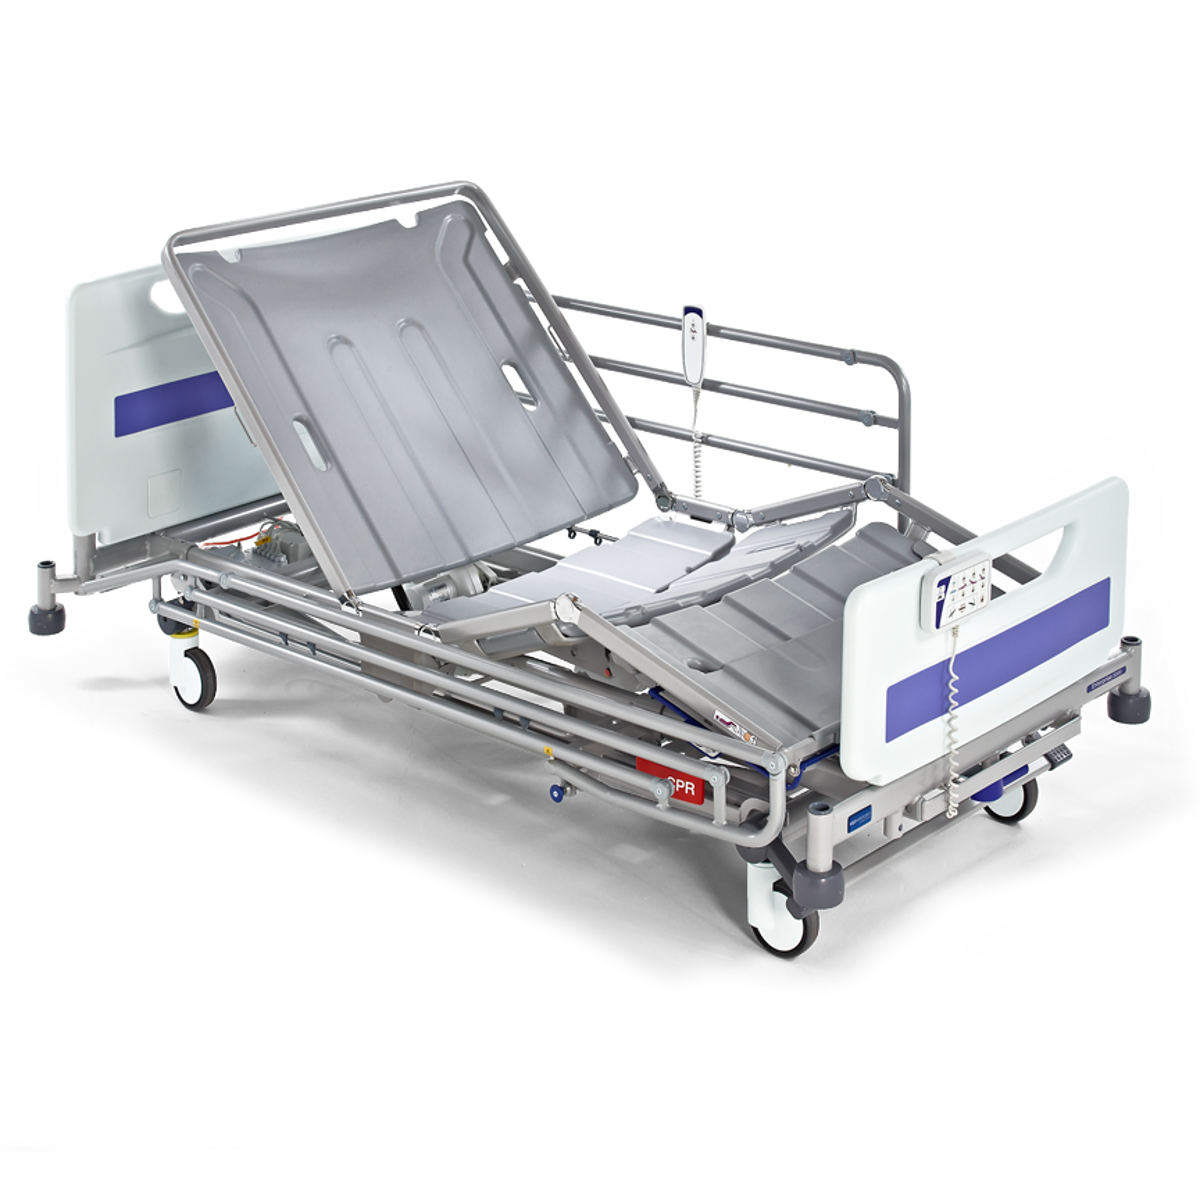 ArjoHuntleigh-Products-Medical-Beds-Hospital-Beds-Enterprise-5000.png